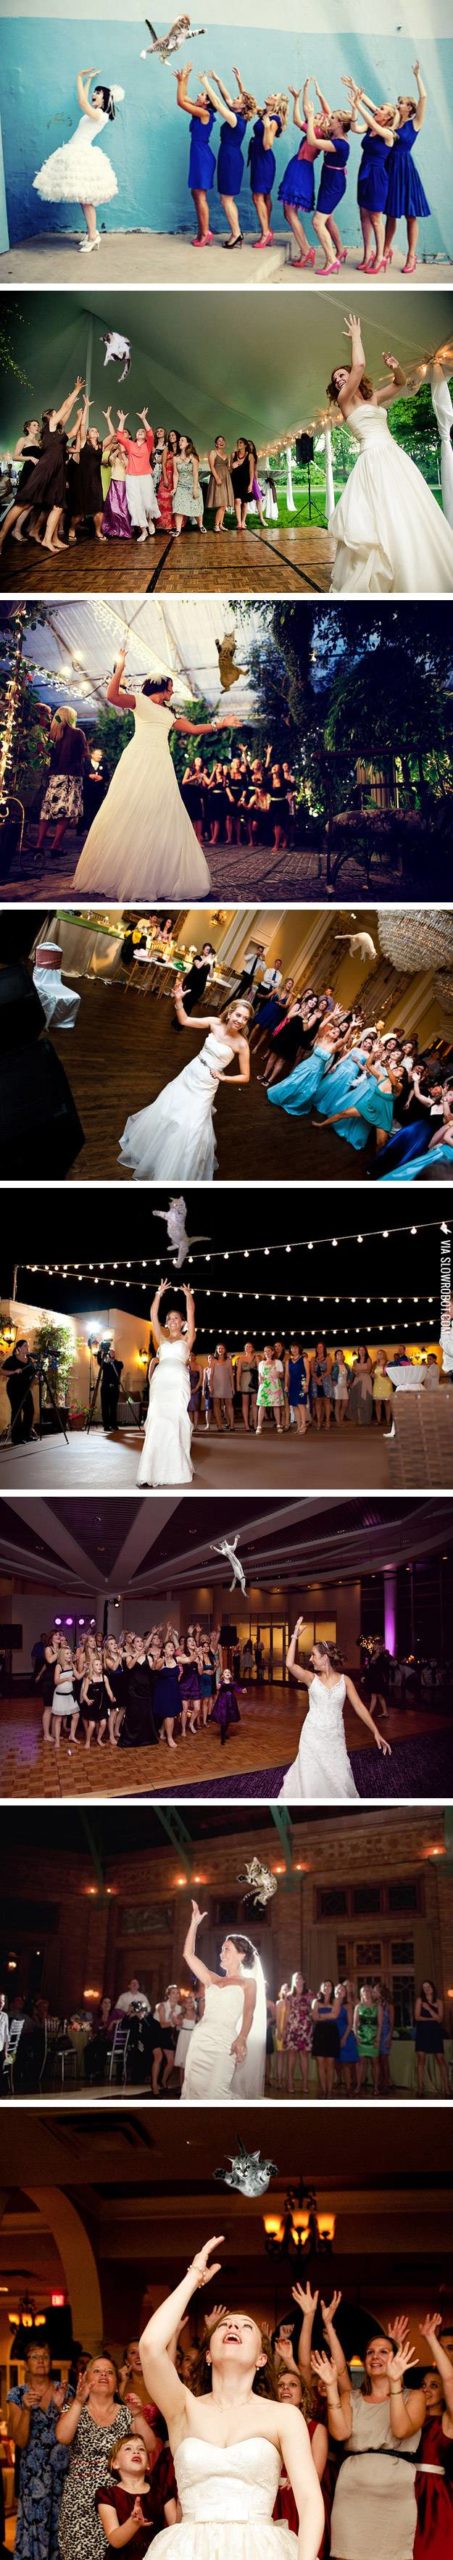 Brides+throwing+kitty+bouquets.